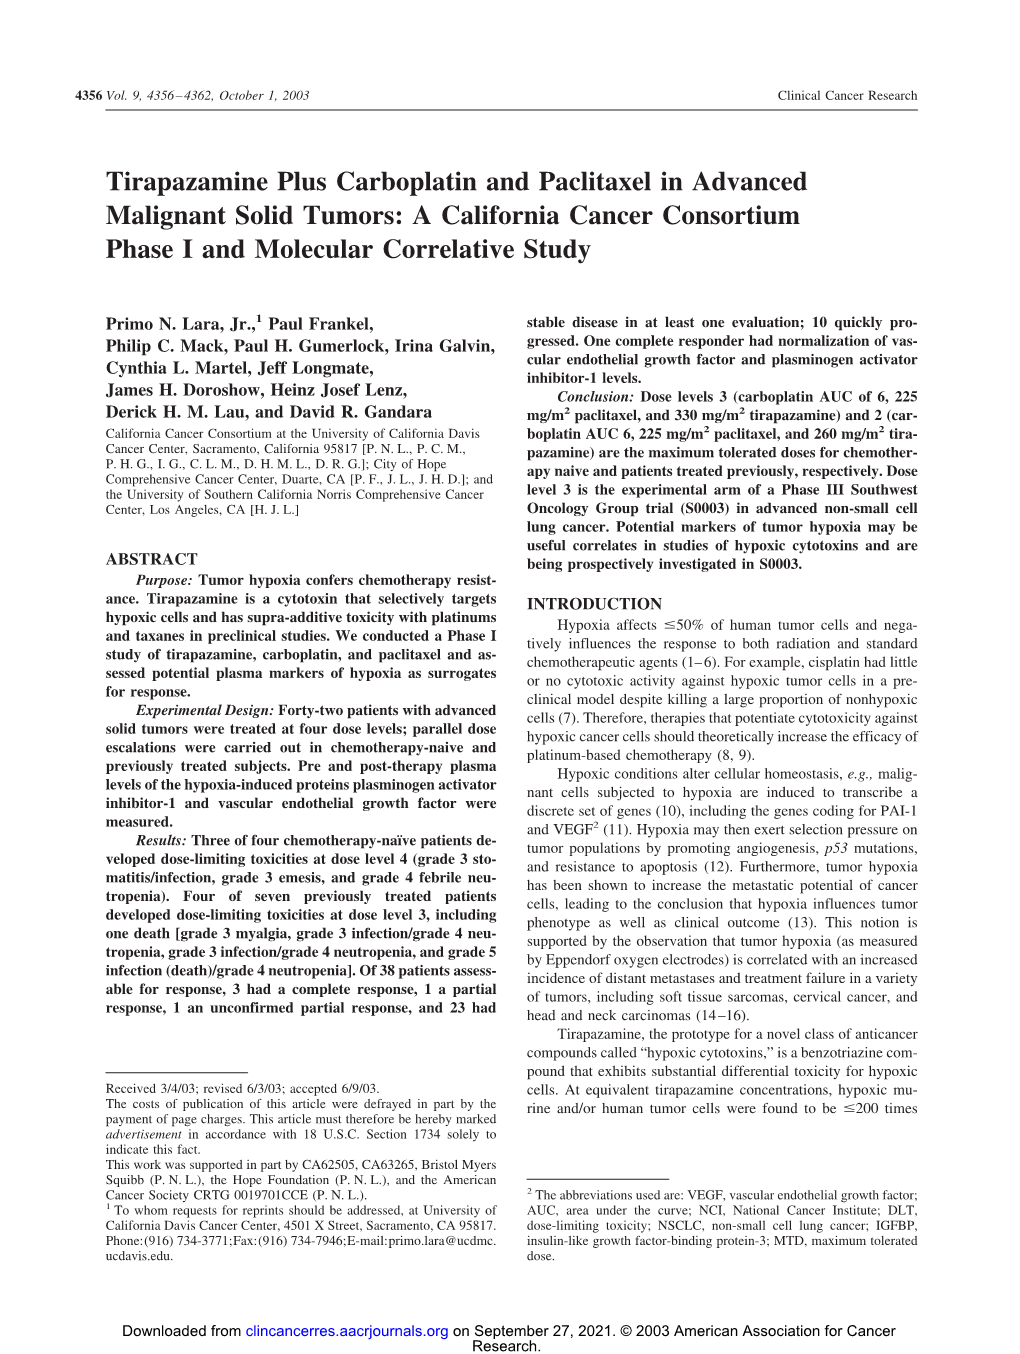 Tirapazamine Plus Carboplatin and Paclitaxel in Advanced Malignant Solid Tumors: a California Cancer Consortium Phase I and Molecular Correlative Study